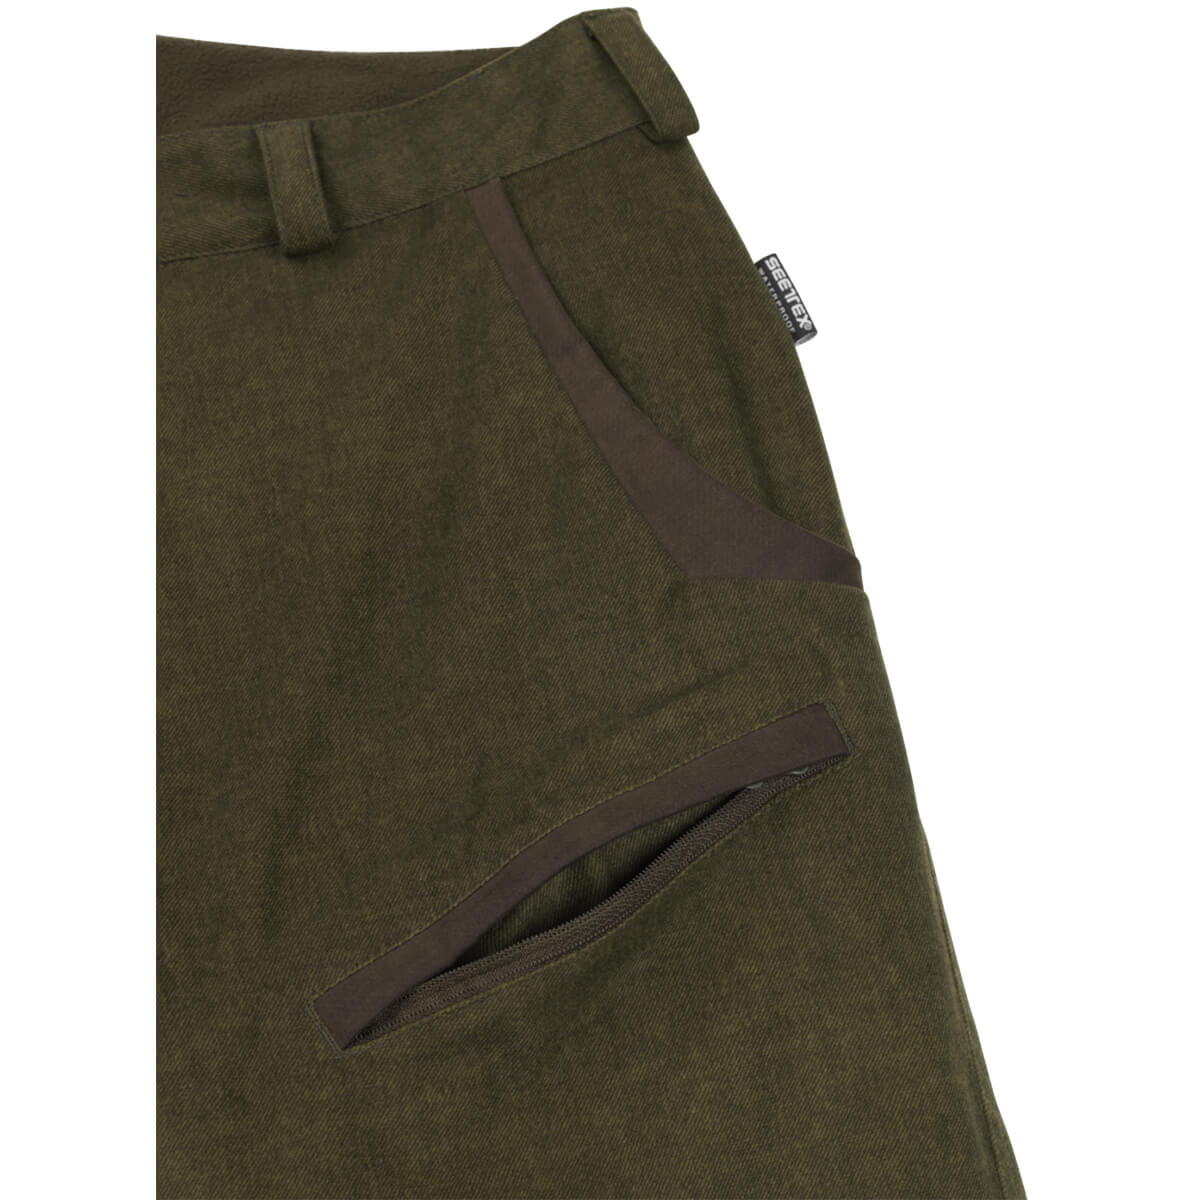 Seeland Trousers Lady North